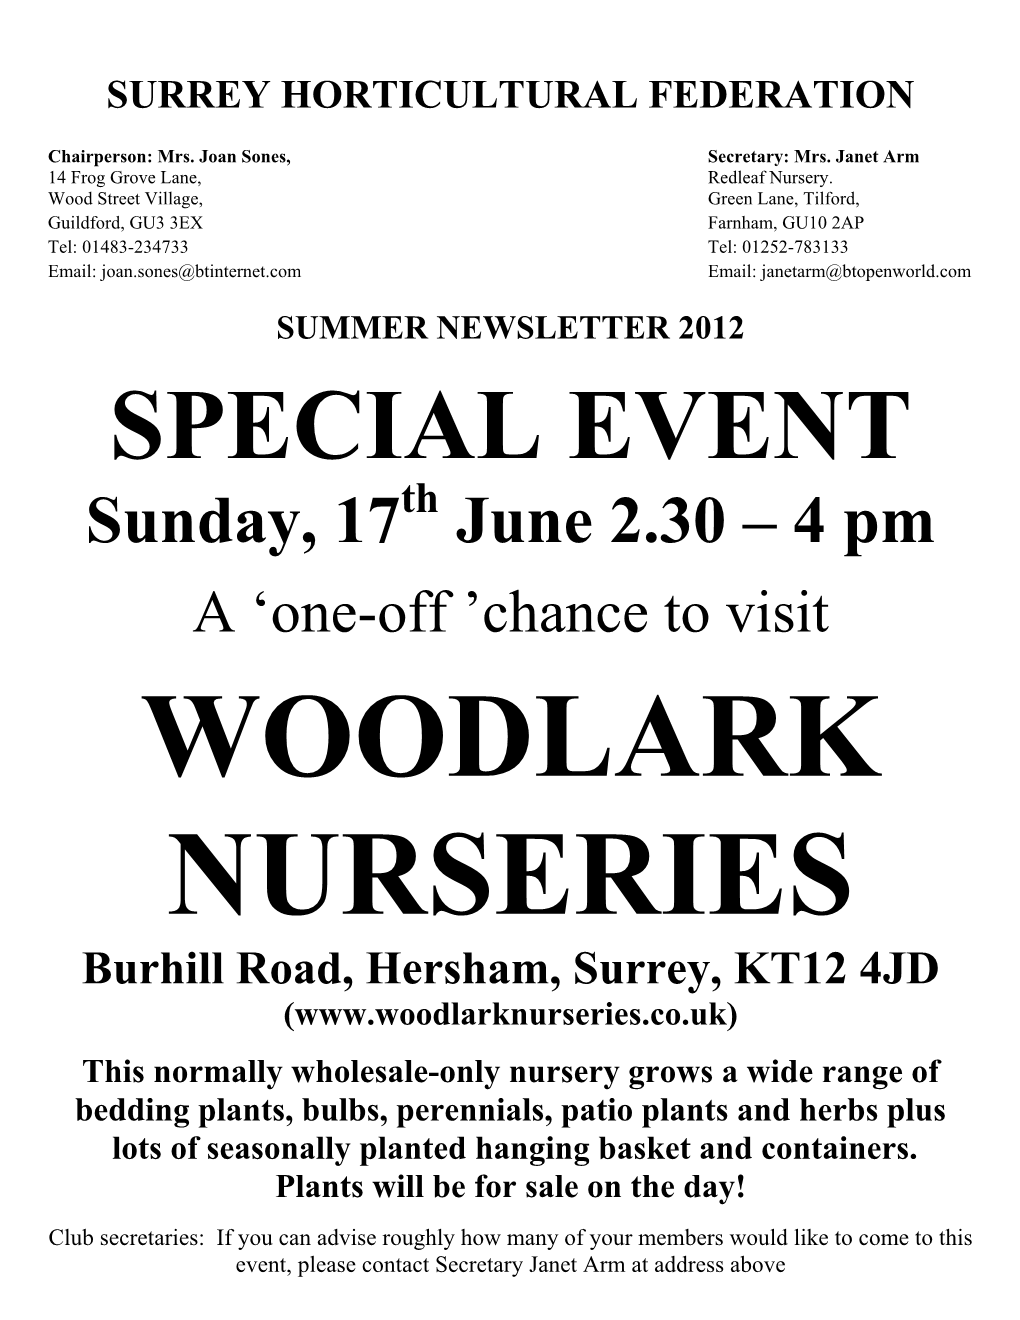 SPECIAL EVENT Sunday, 17Th June 2.30 – 4 Pm